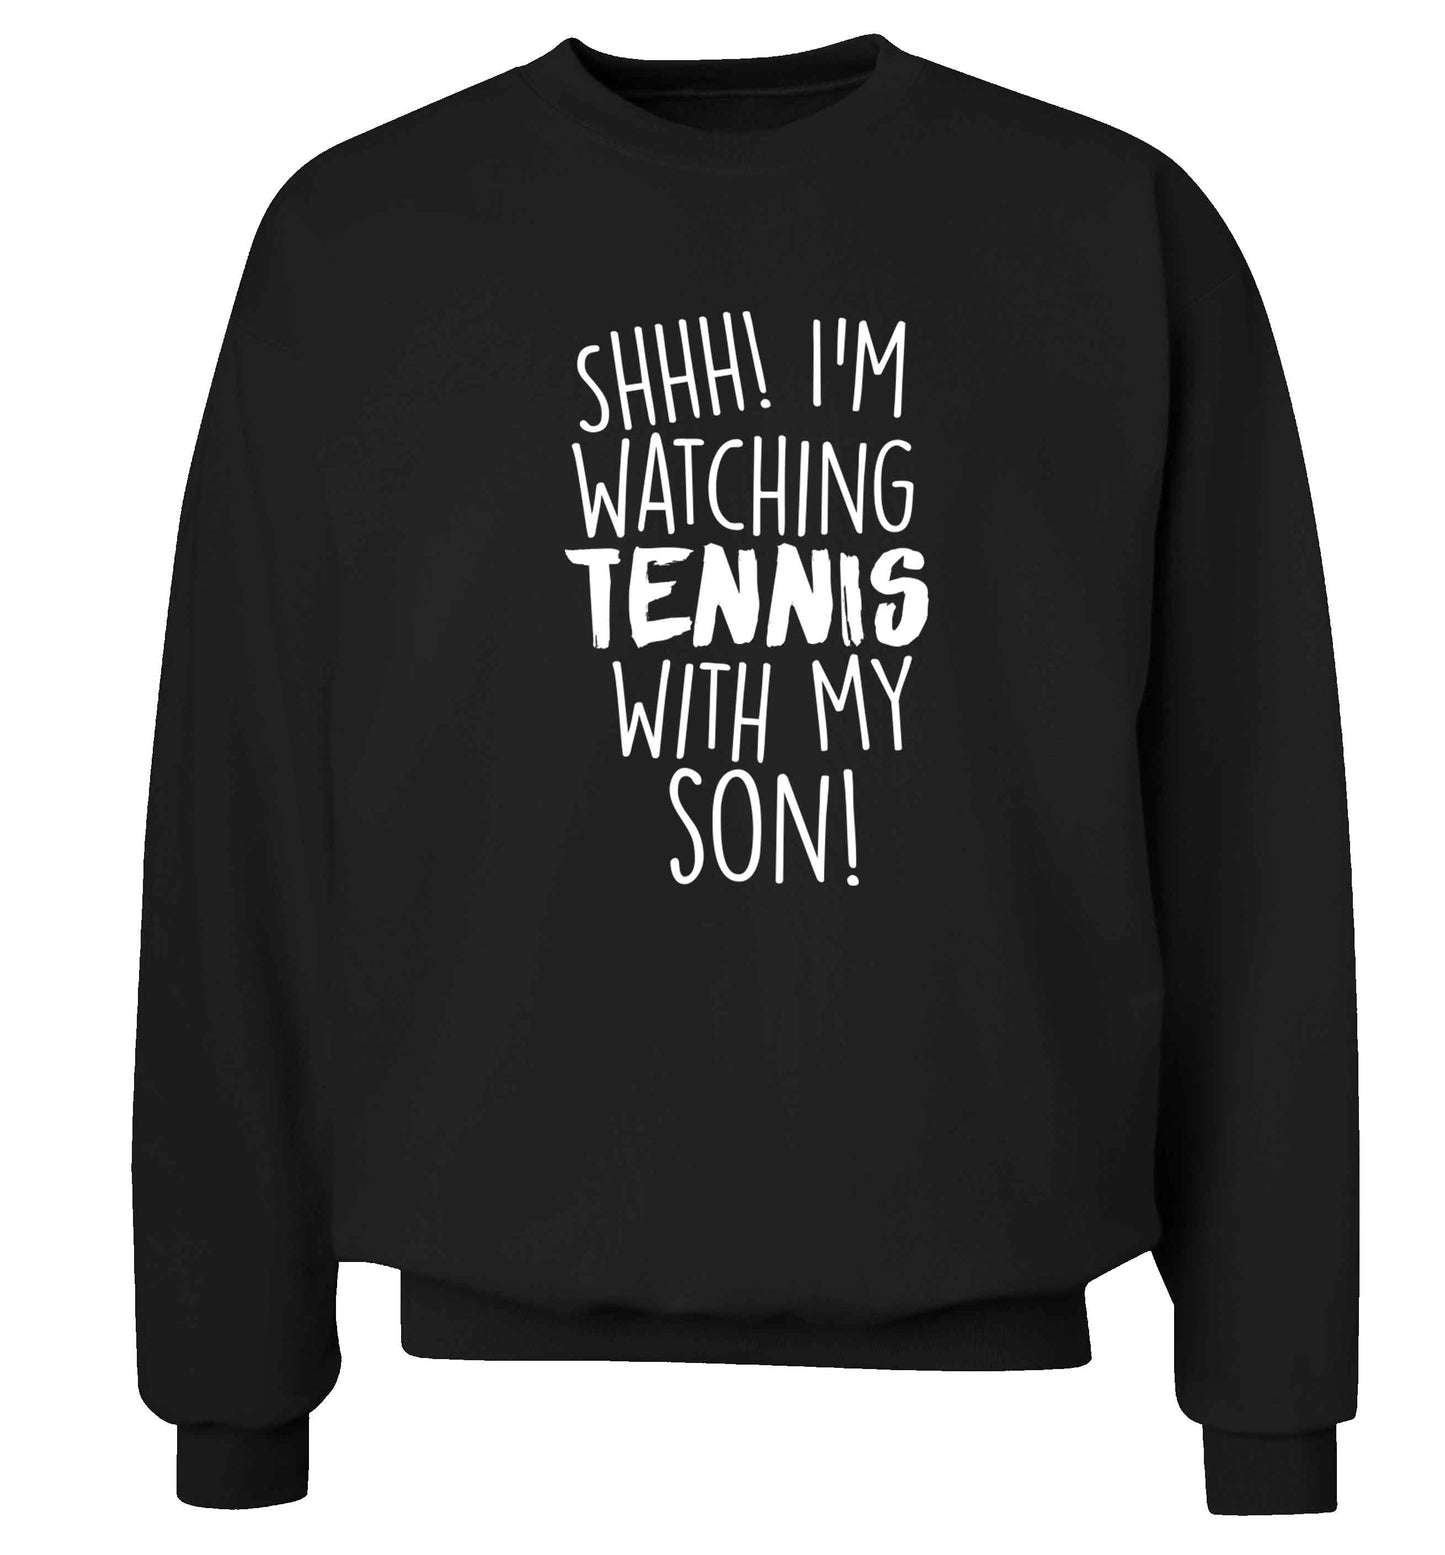 Shh! I'm watching tennis with my son! Adult's unisex black Sweater 2XL